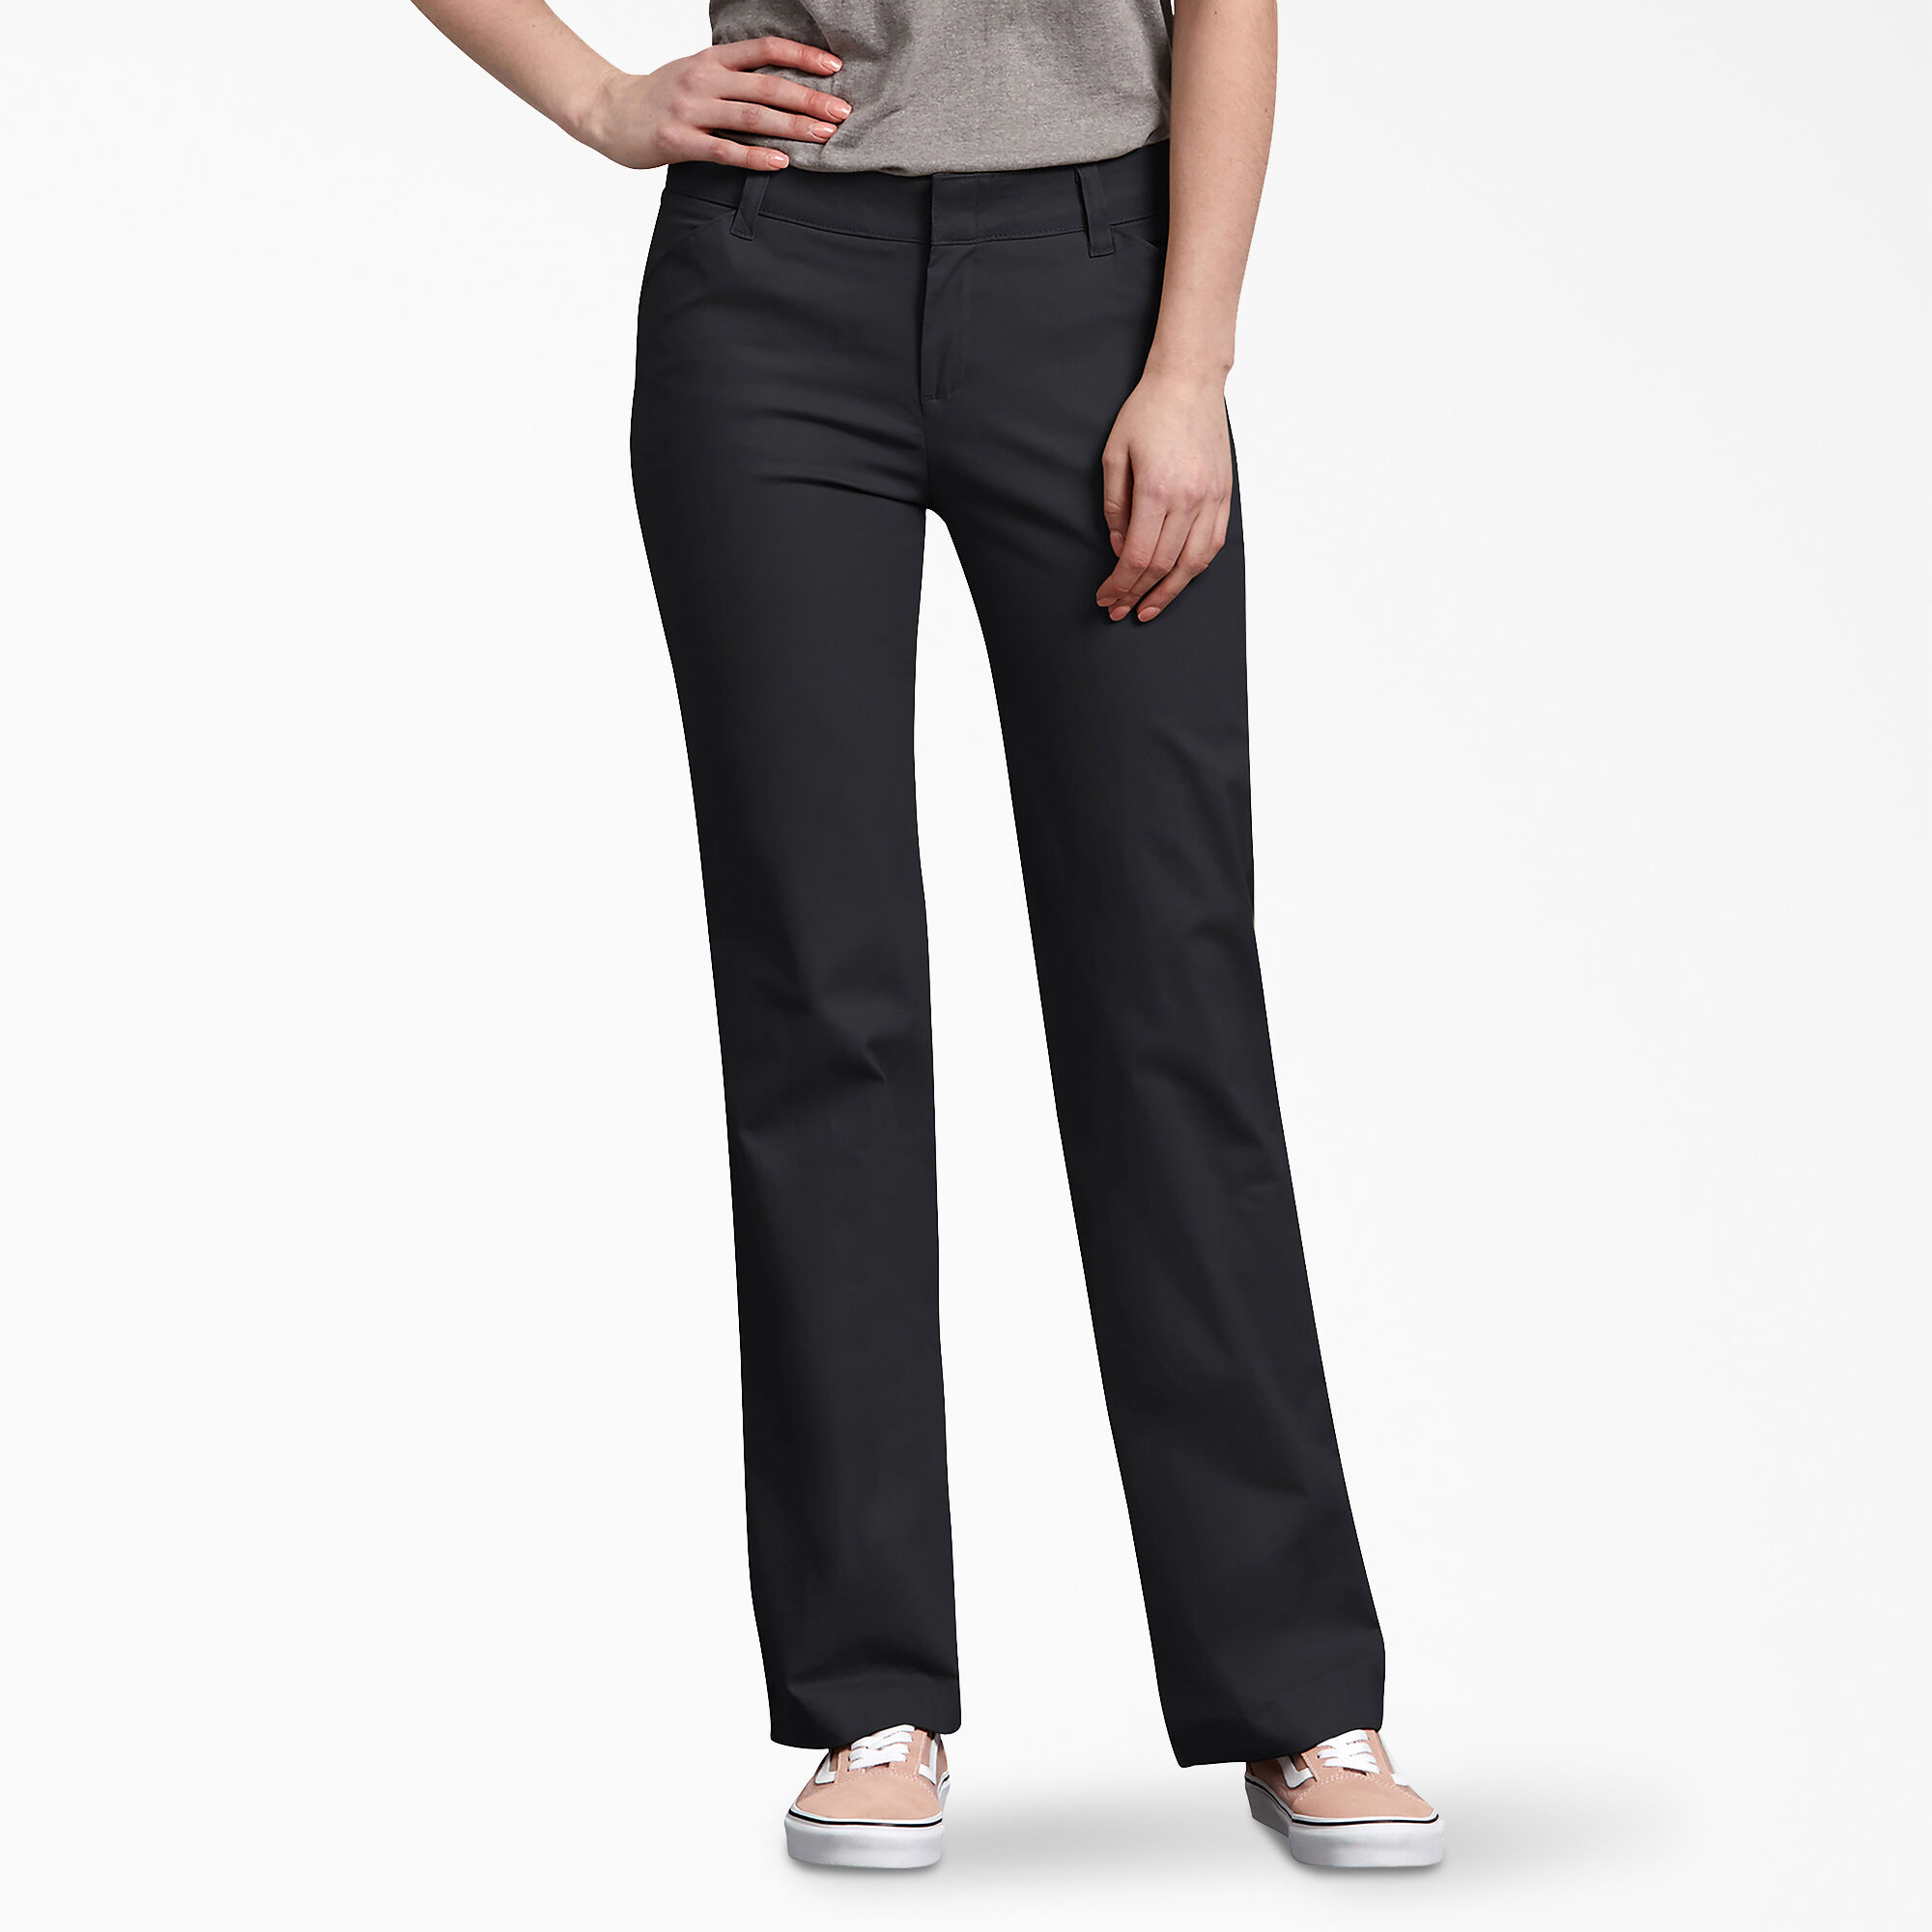 Women's Relaxed Fit Straight Leg Pants